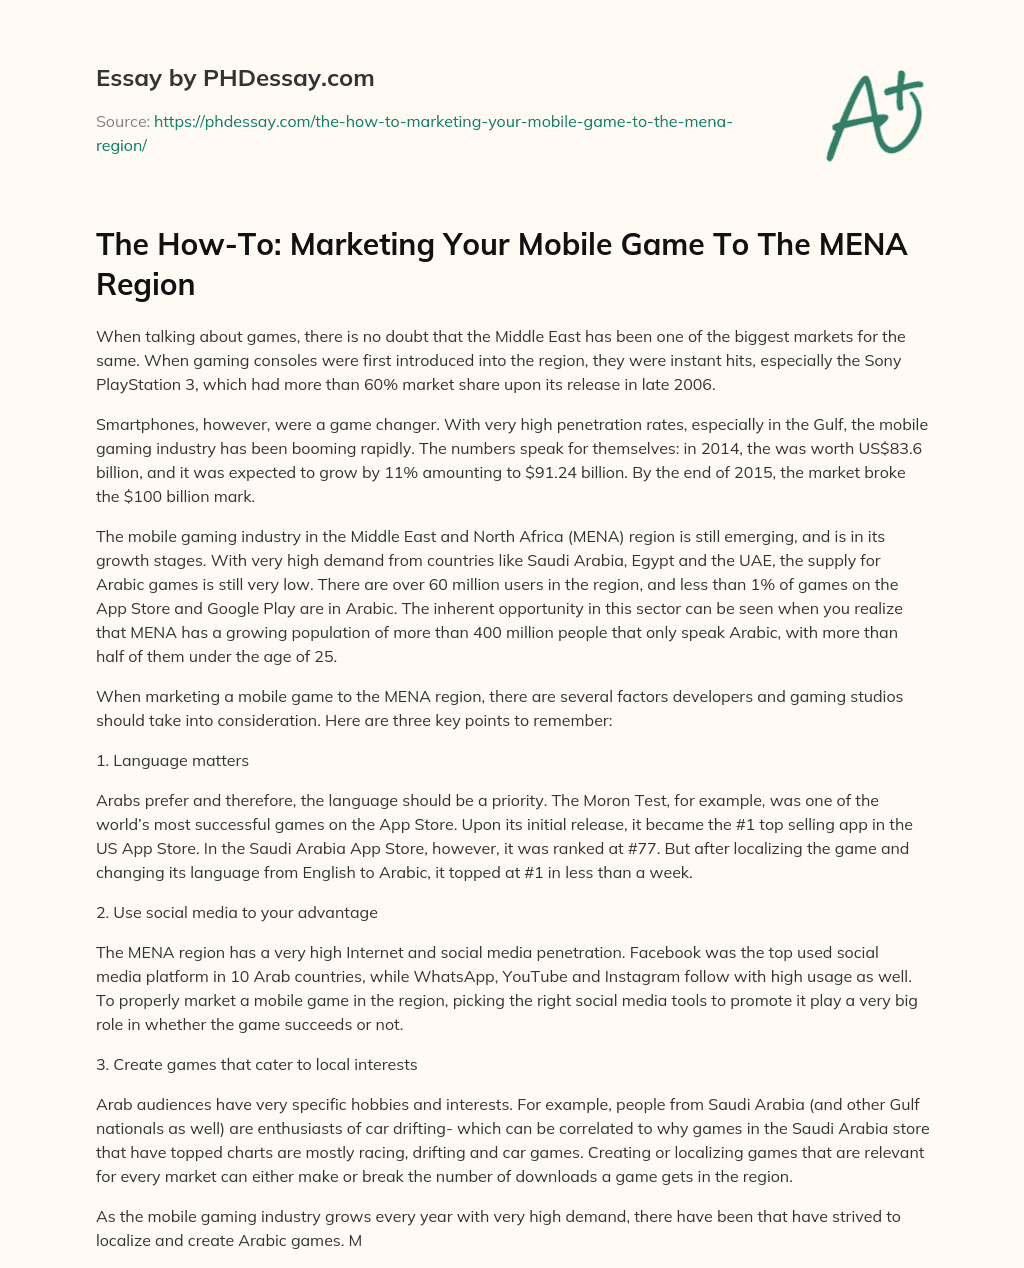 The How-To: Marketing Your Mobile Game To The MENA Region essay